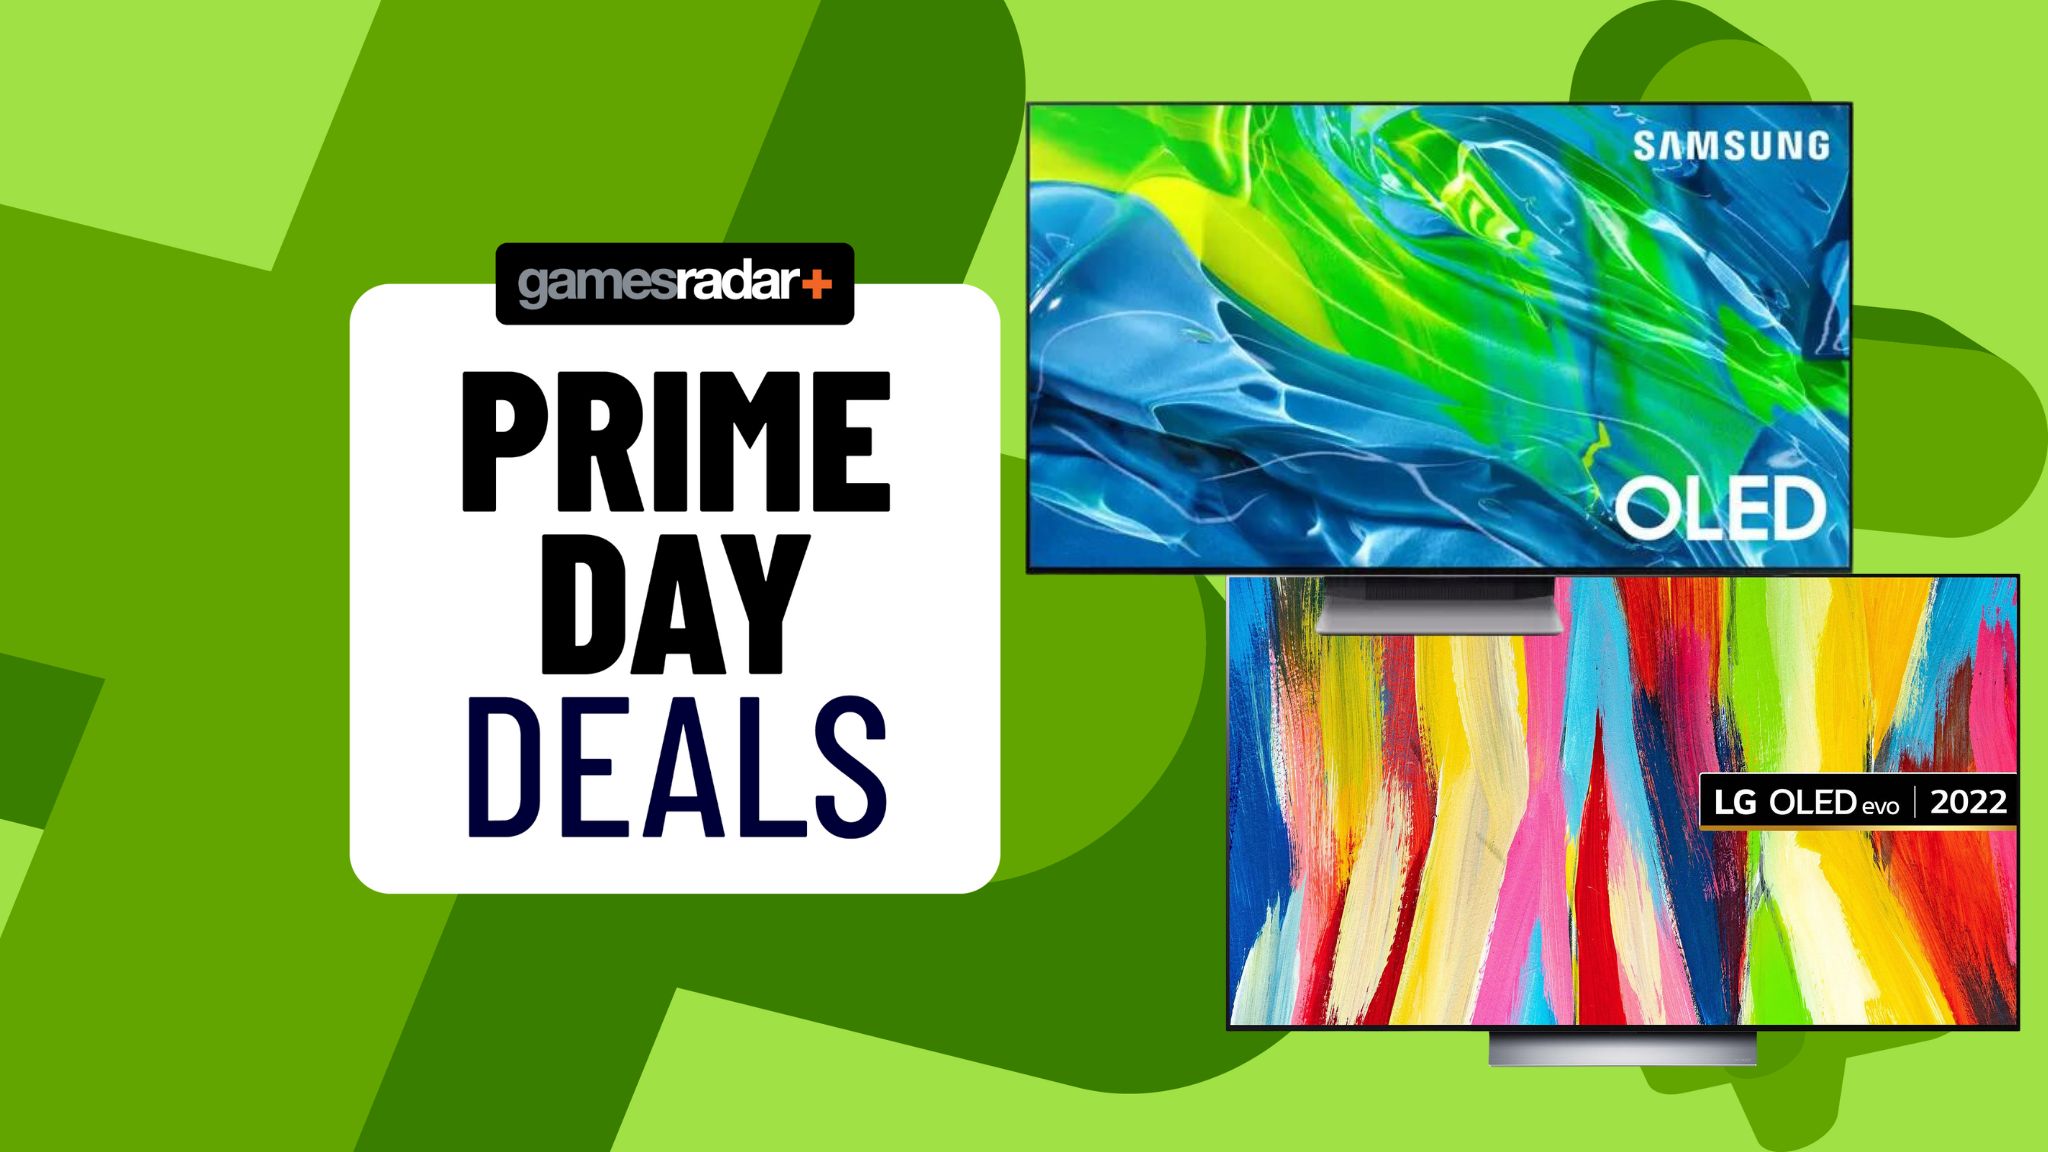 This 85-inch TV Prime Day deal is the one I'd buy, but it would take over  my living room